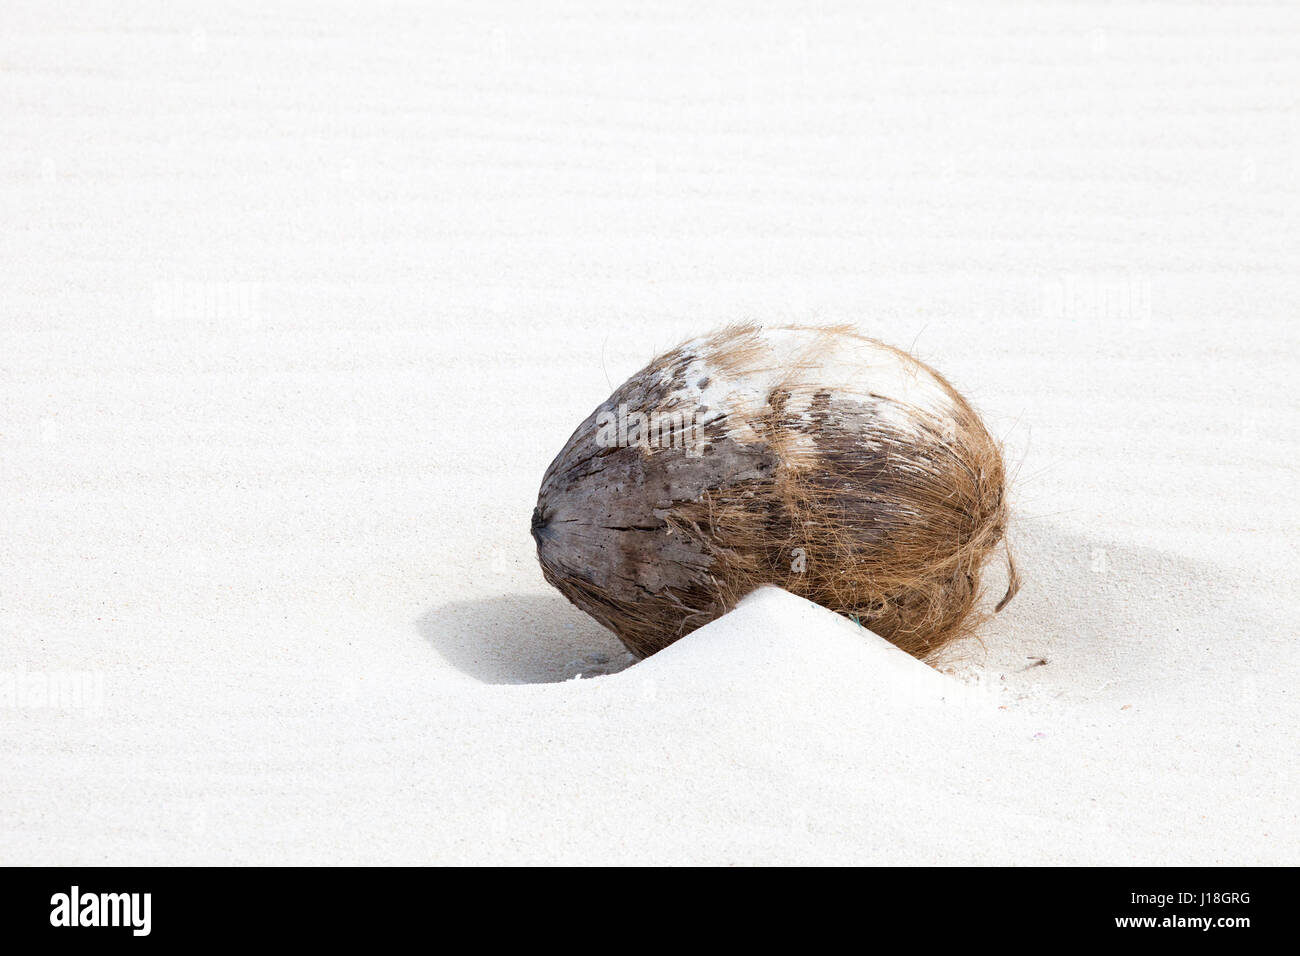 Coconut seed washed ashore on the beach of a North Pacific island Stock Photo